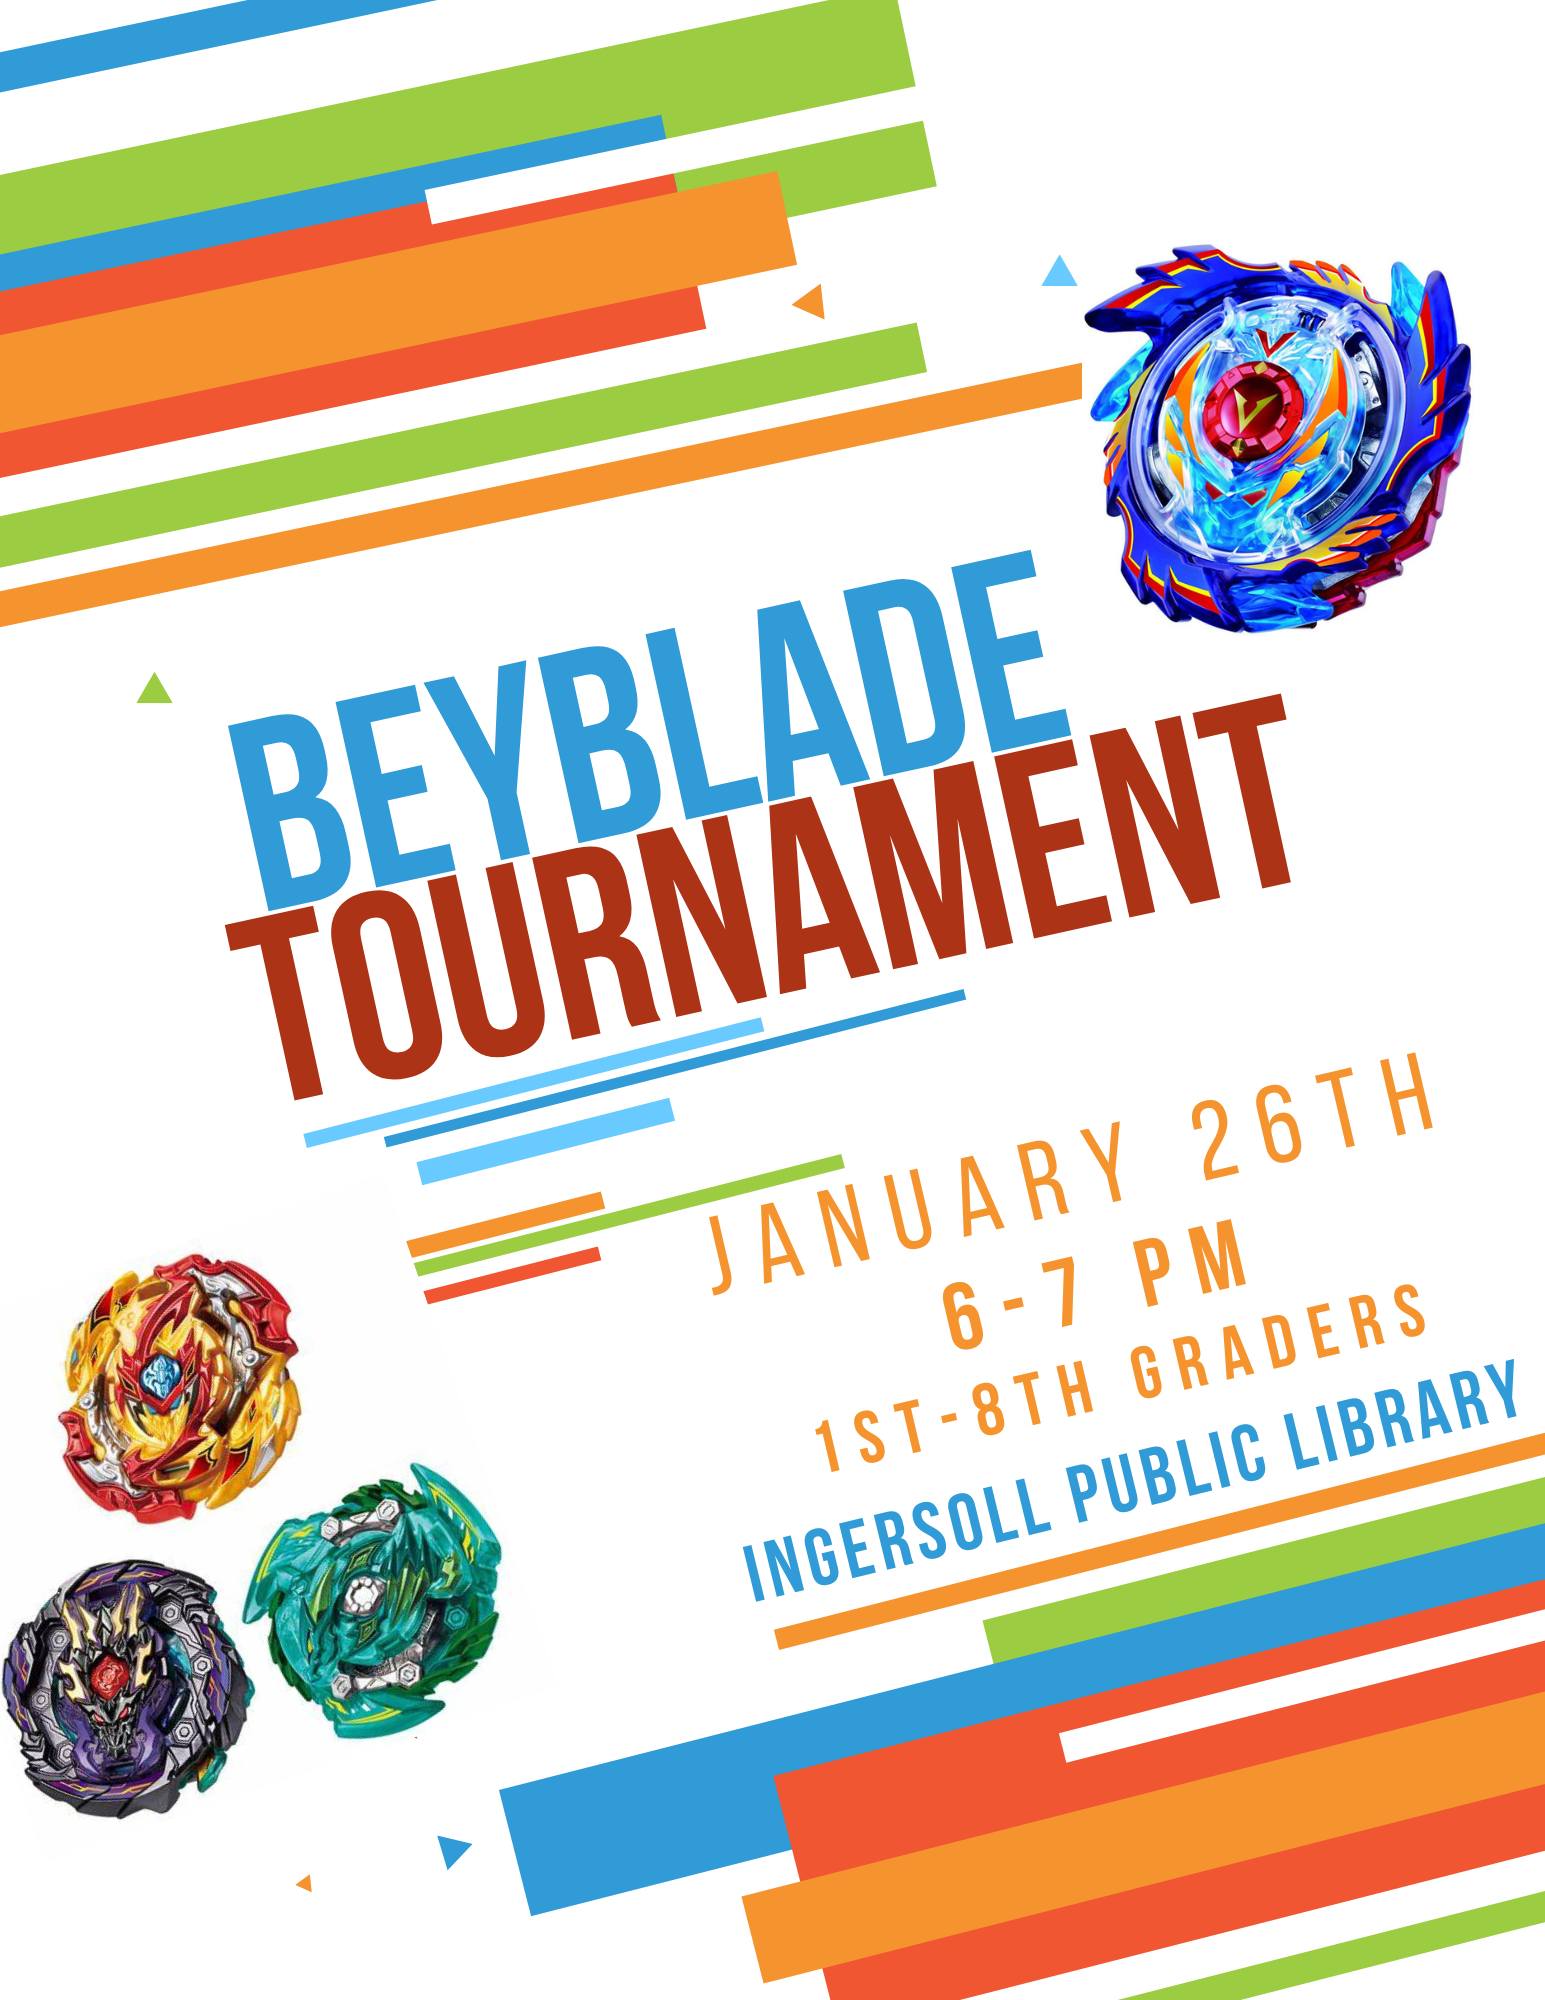 Beyblade tournament flyer. With Dates and Time of event